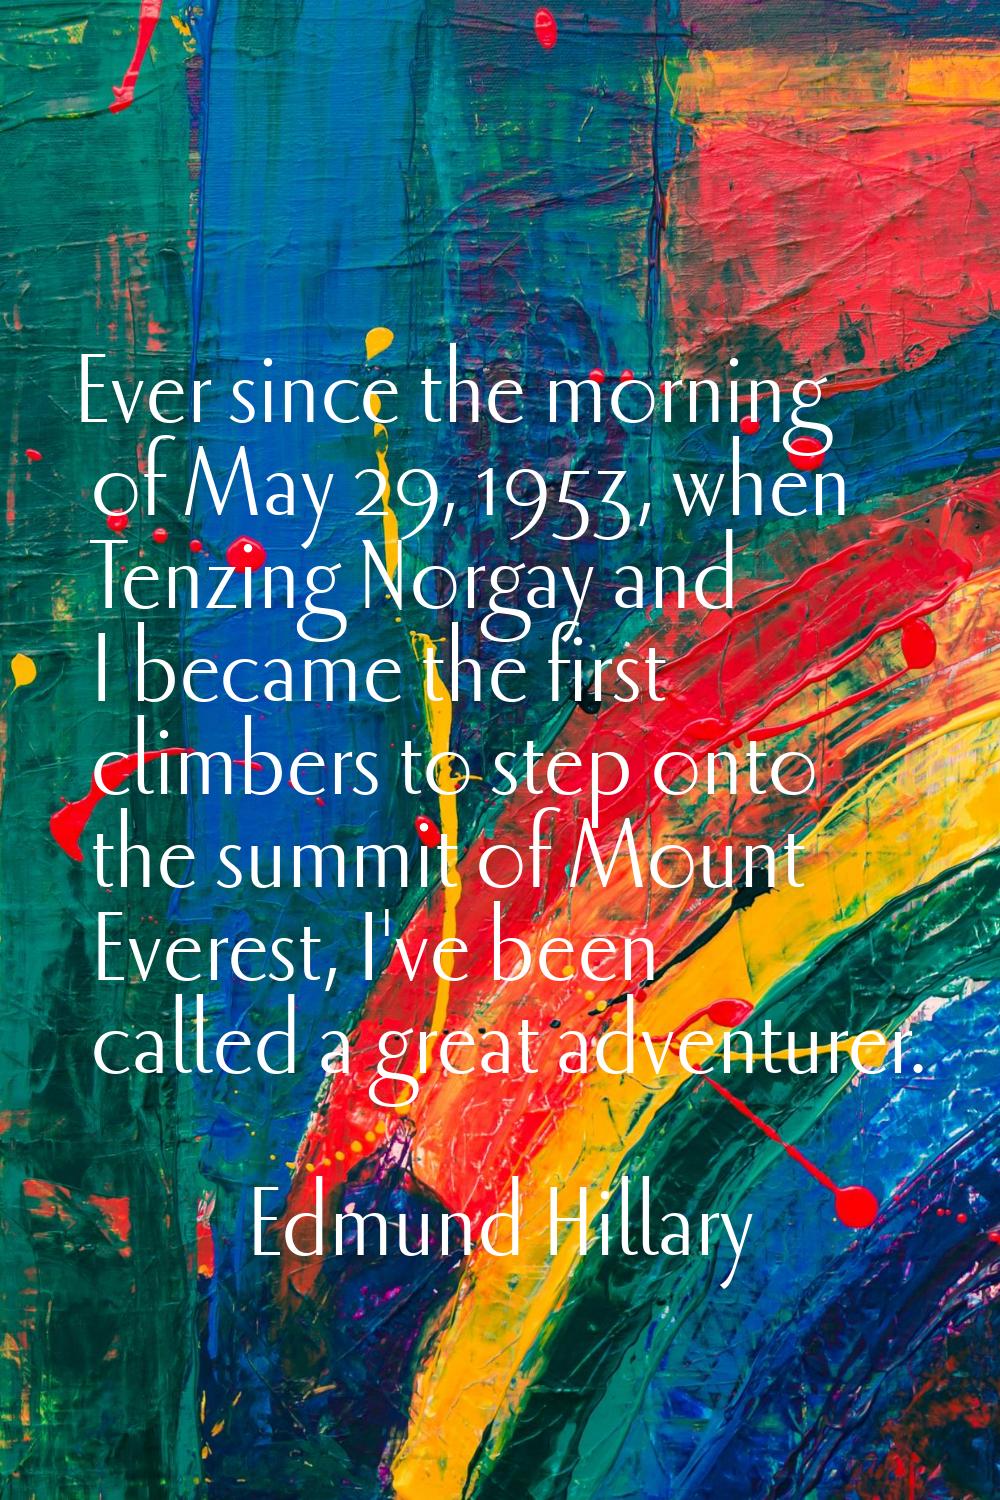 Ever since the morning of May 29, 1953, when Tenzing Norgay and I became the first climbers to step